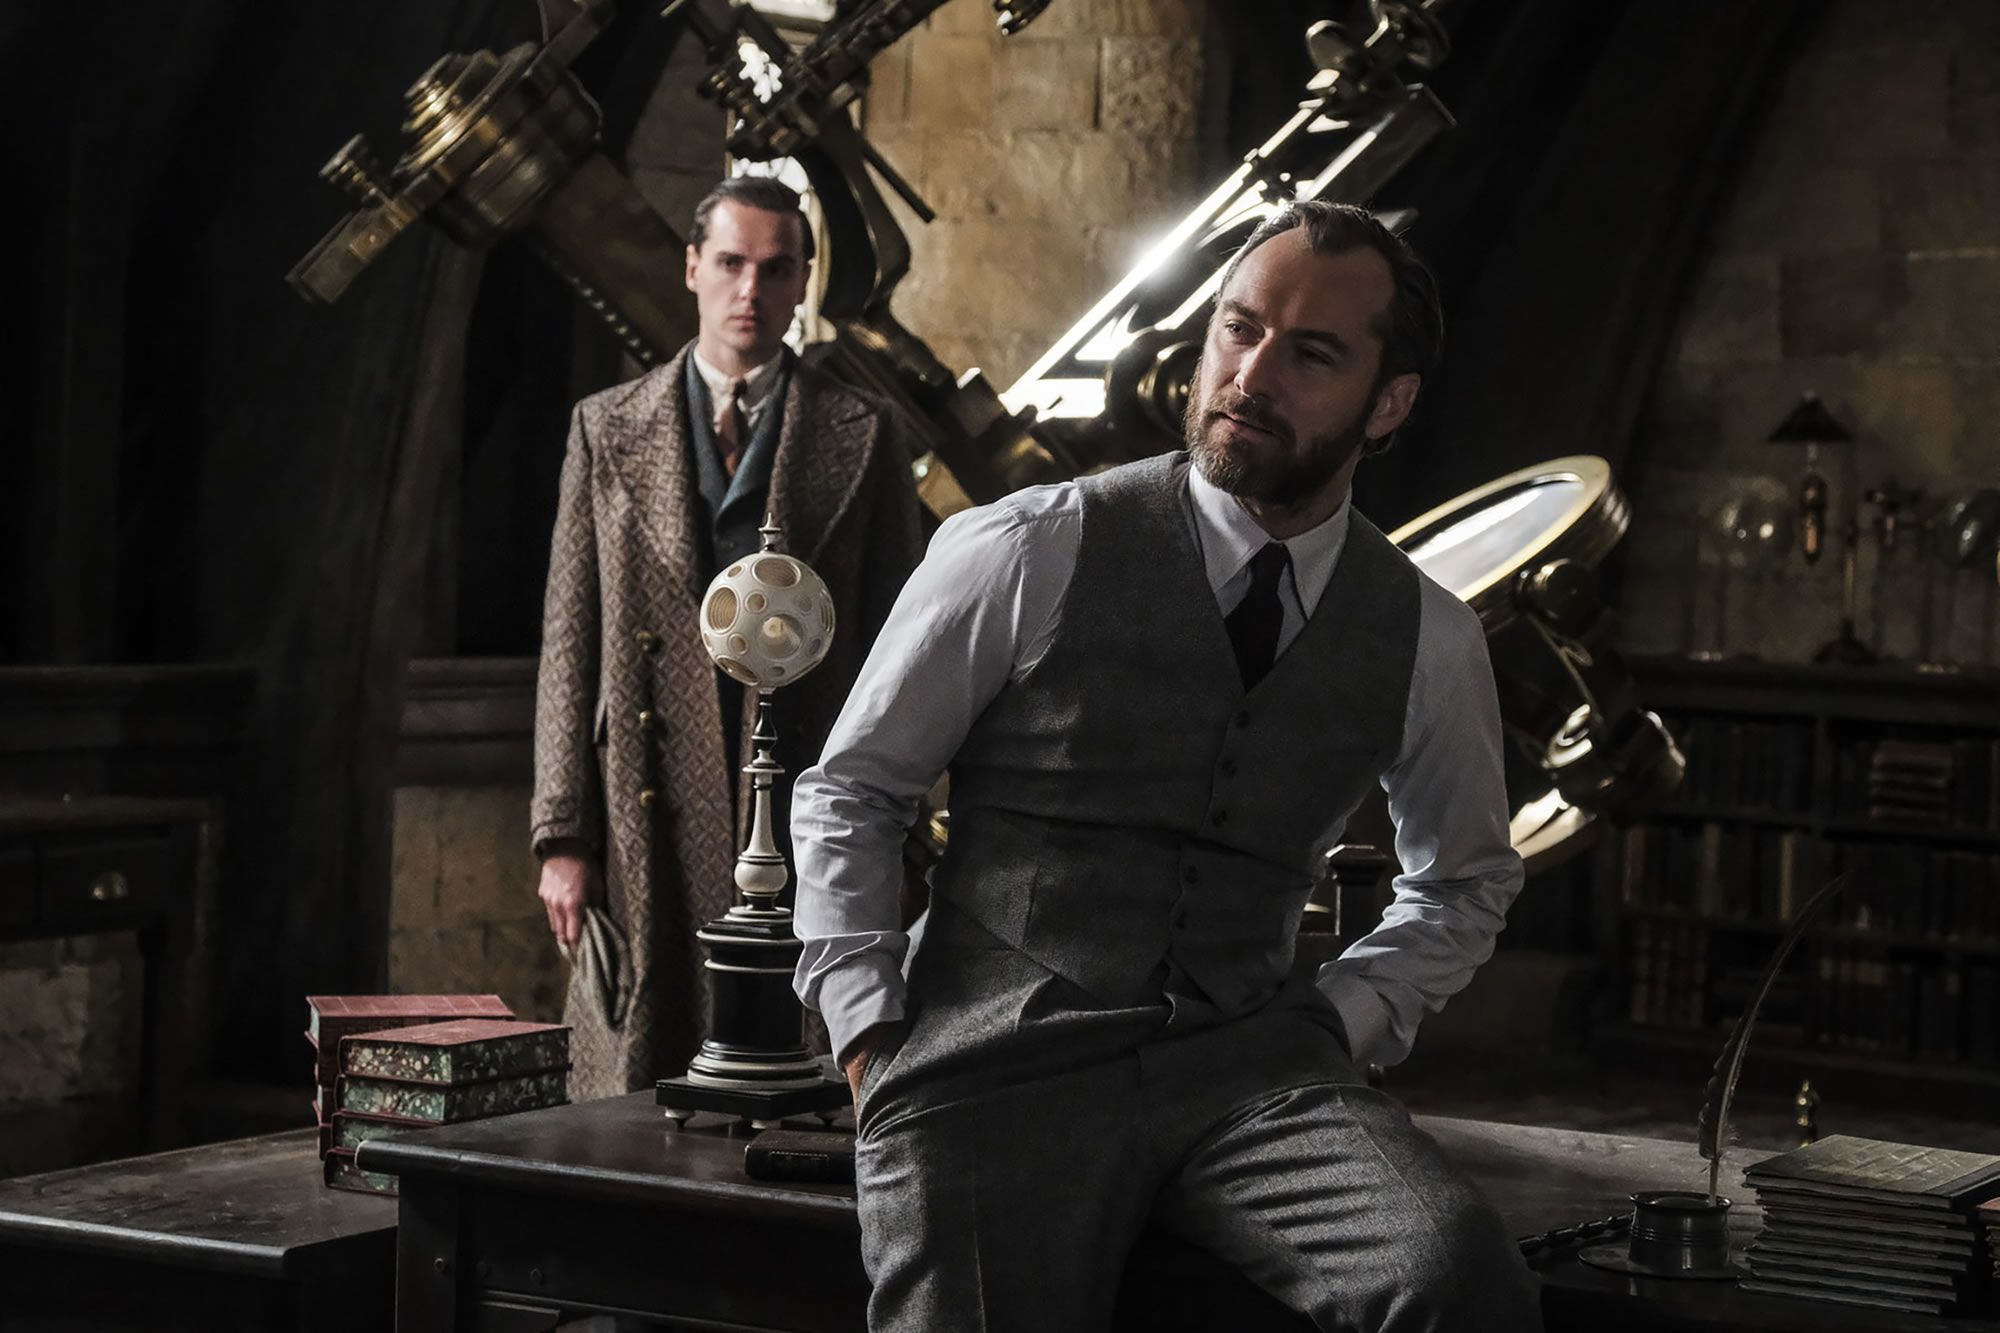 Dumbledore refuses to fight Grindelwald